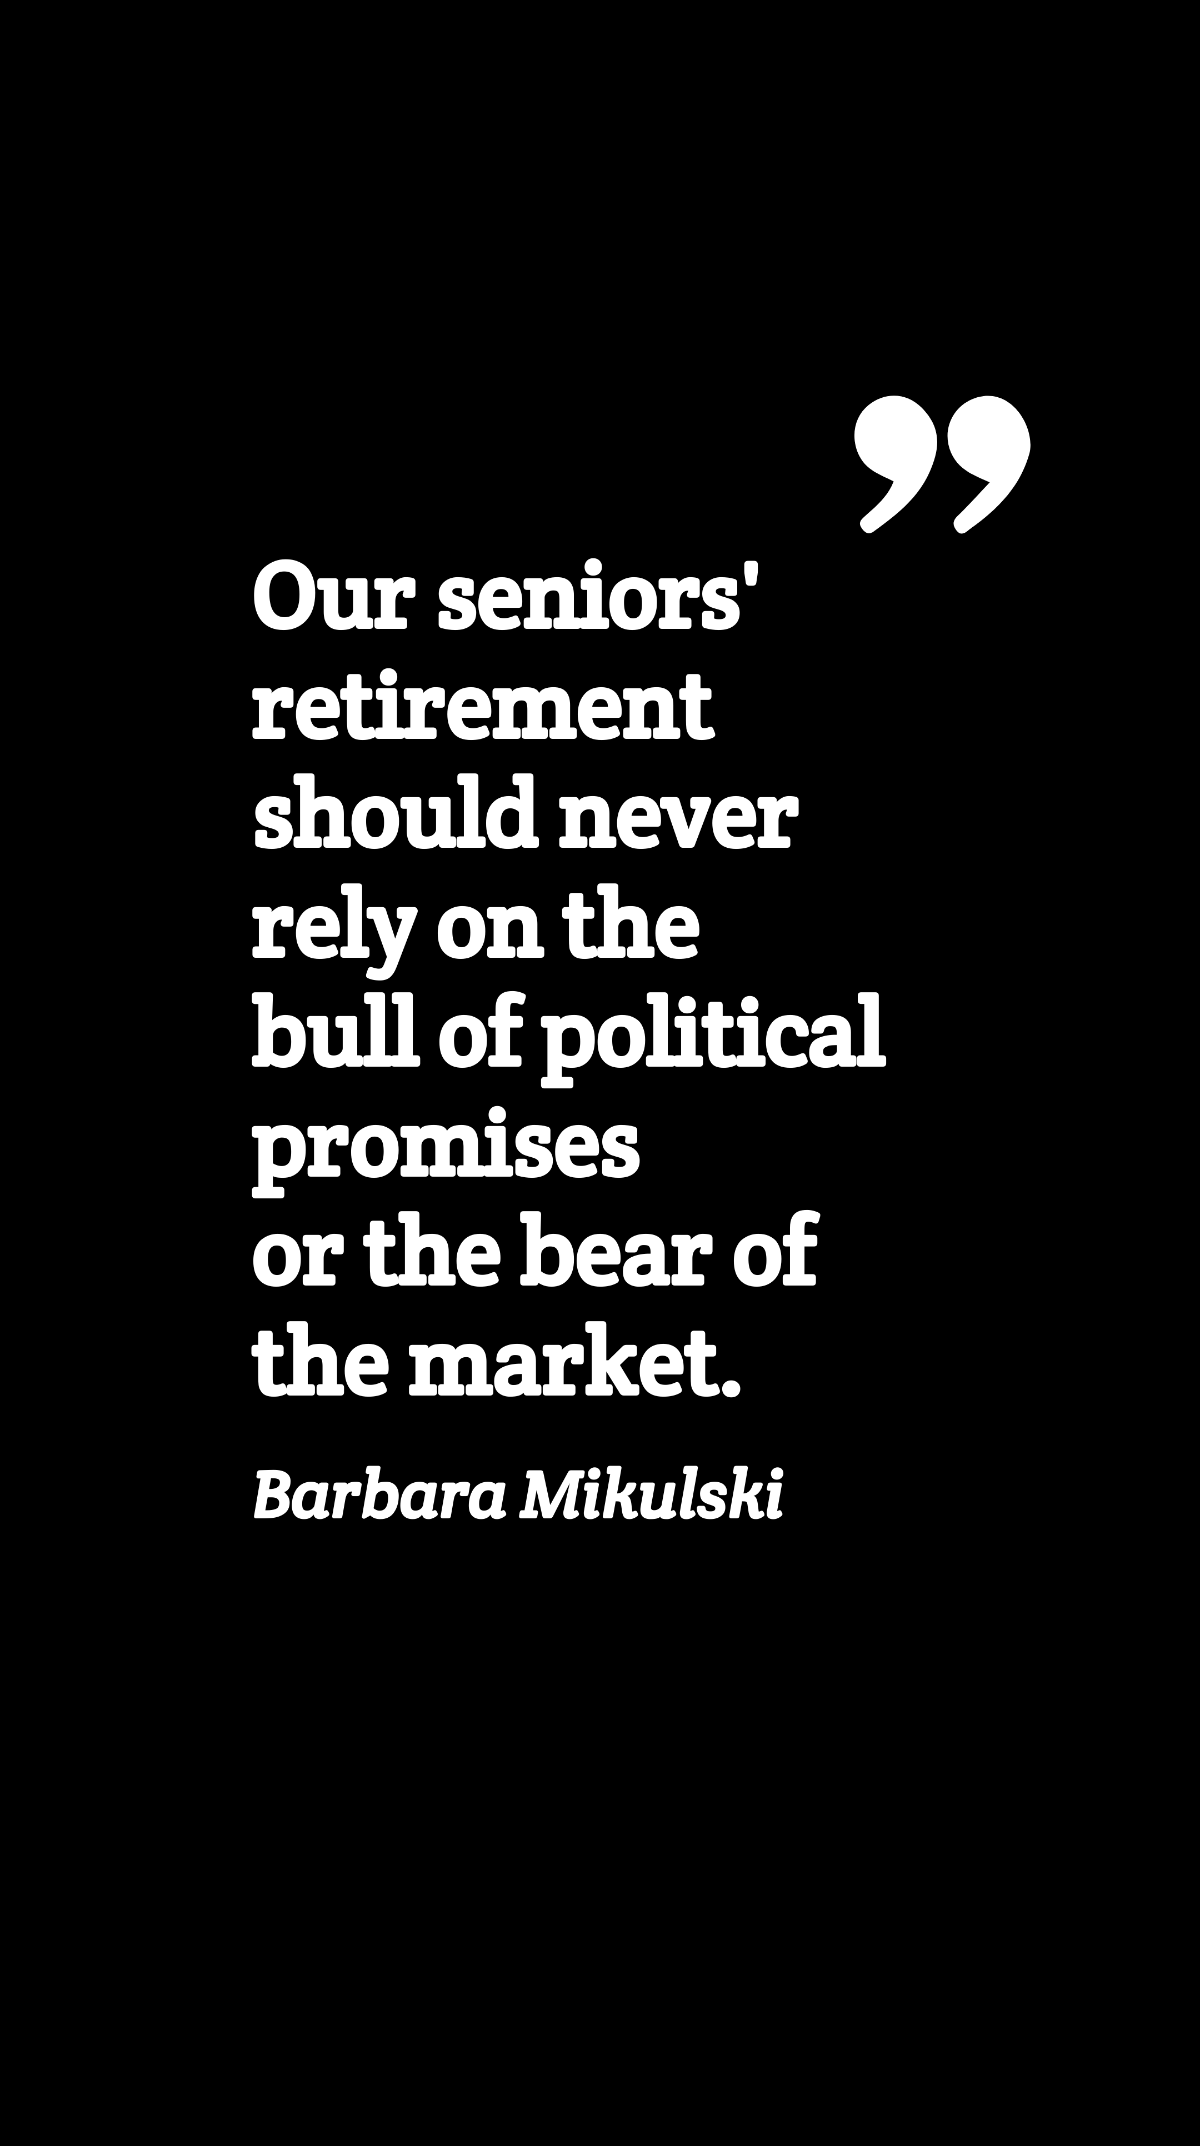 Free Barbara Mikulski - Our seniors' retirement should never rely on the bull of political promises or the bear of the market. Template